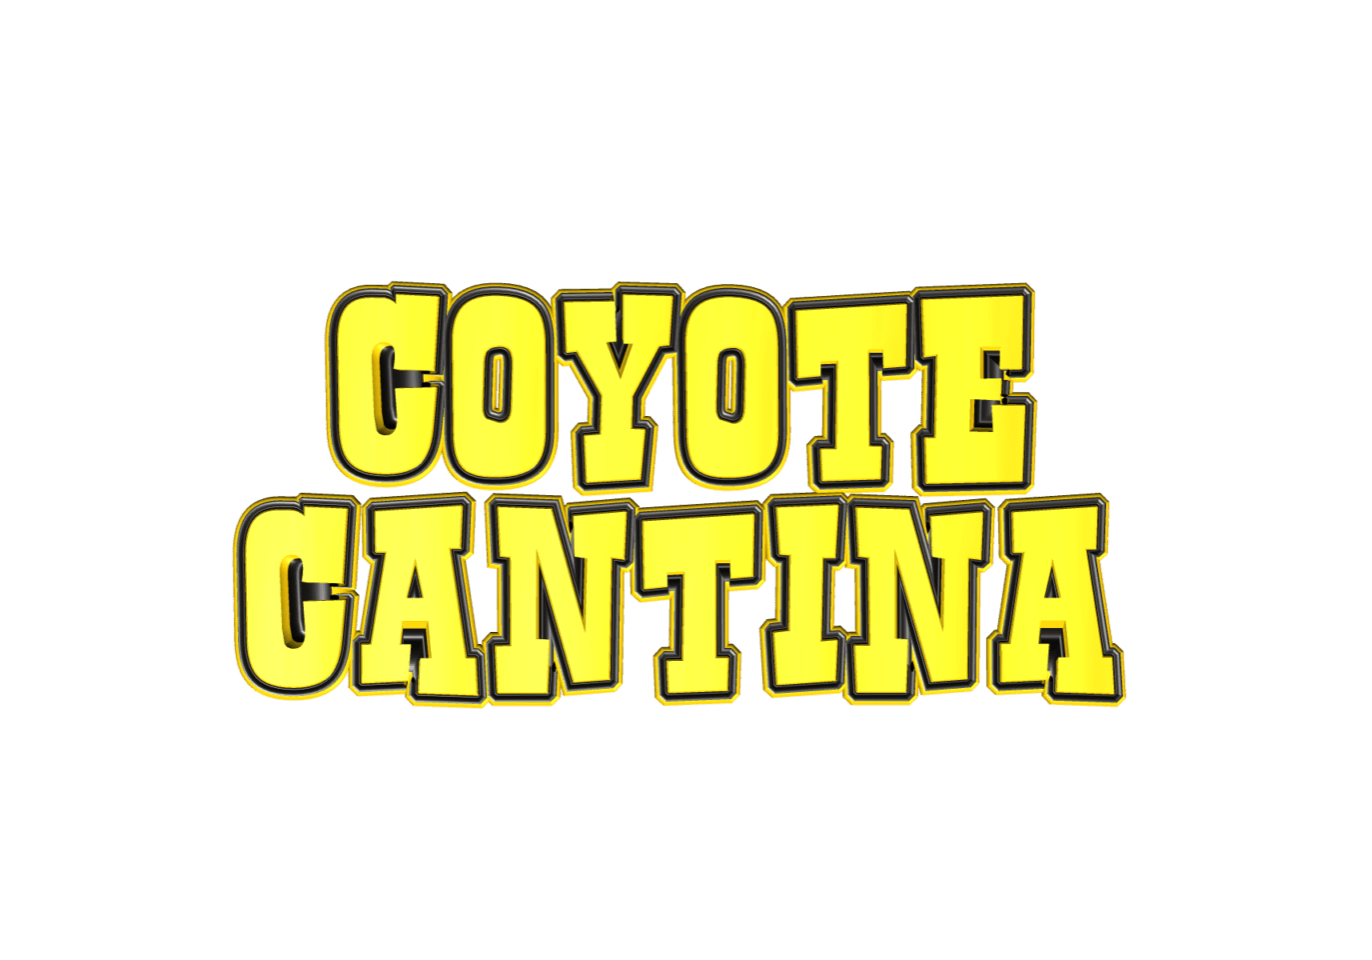 Coyote cantina logo on a green background.